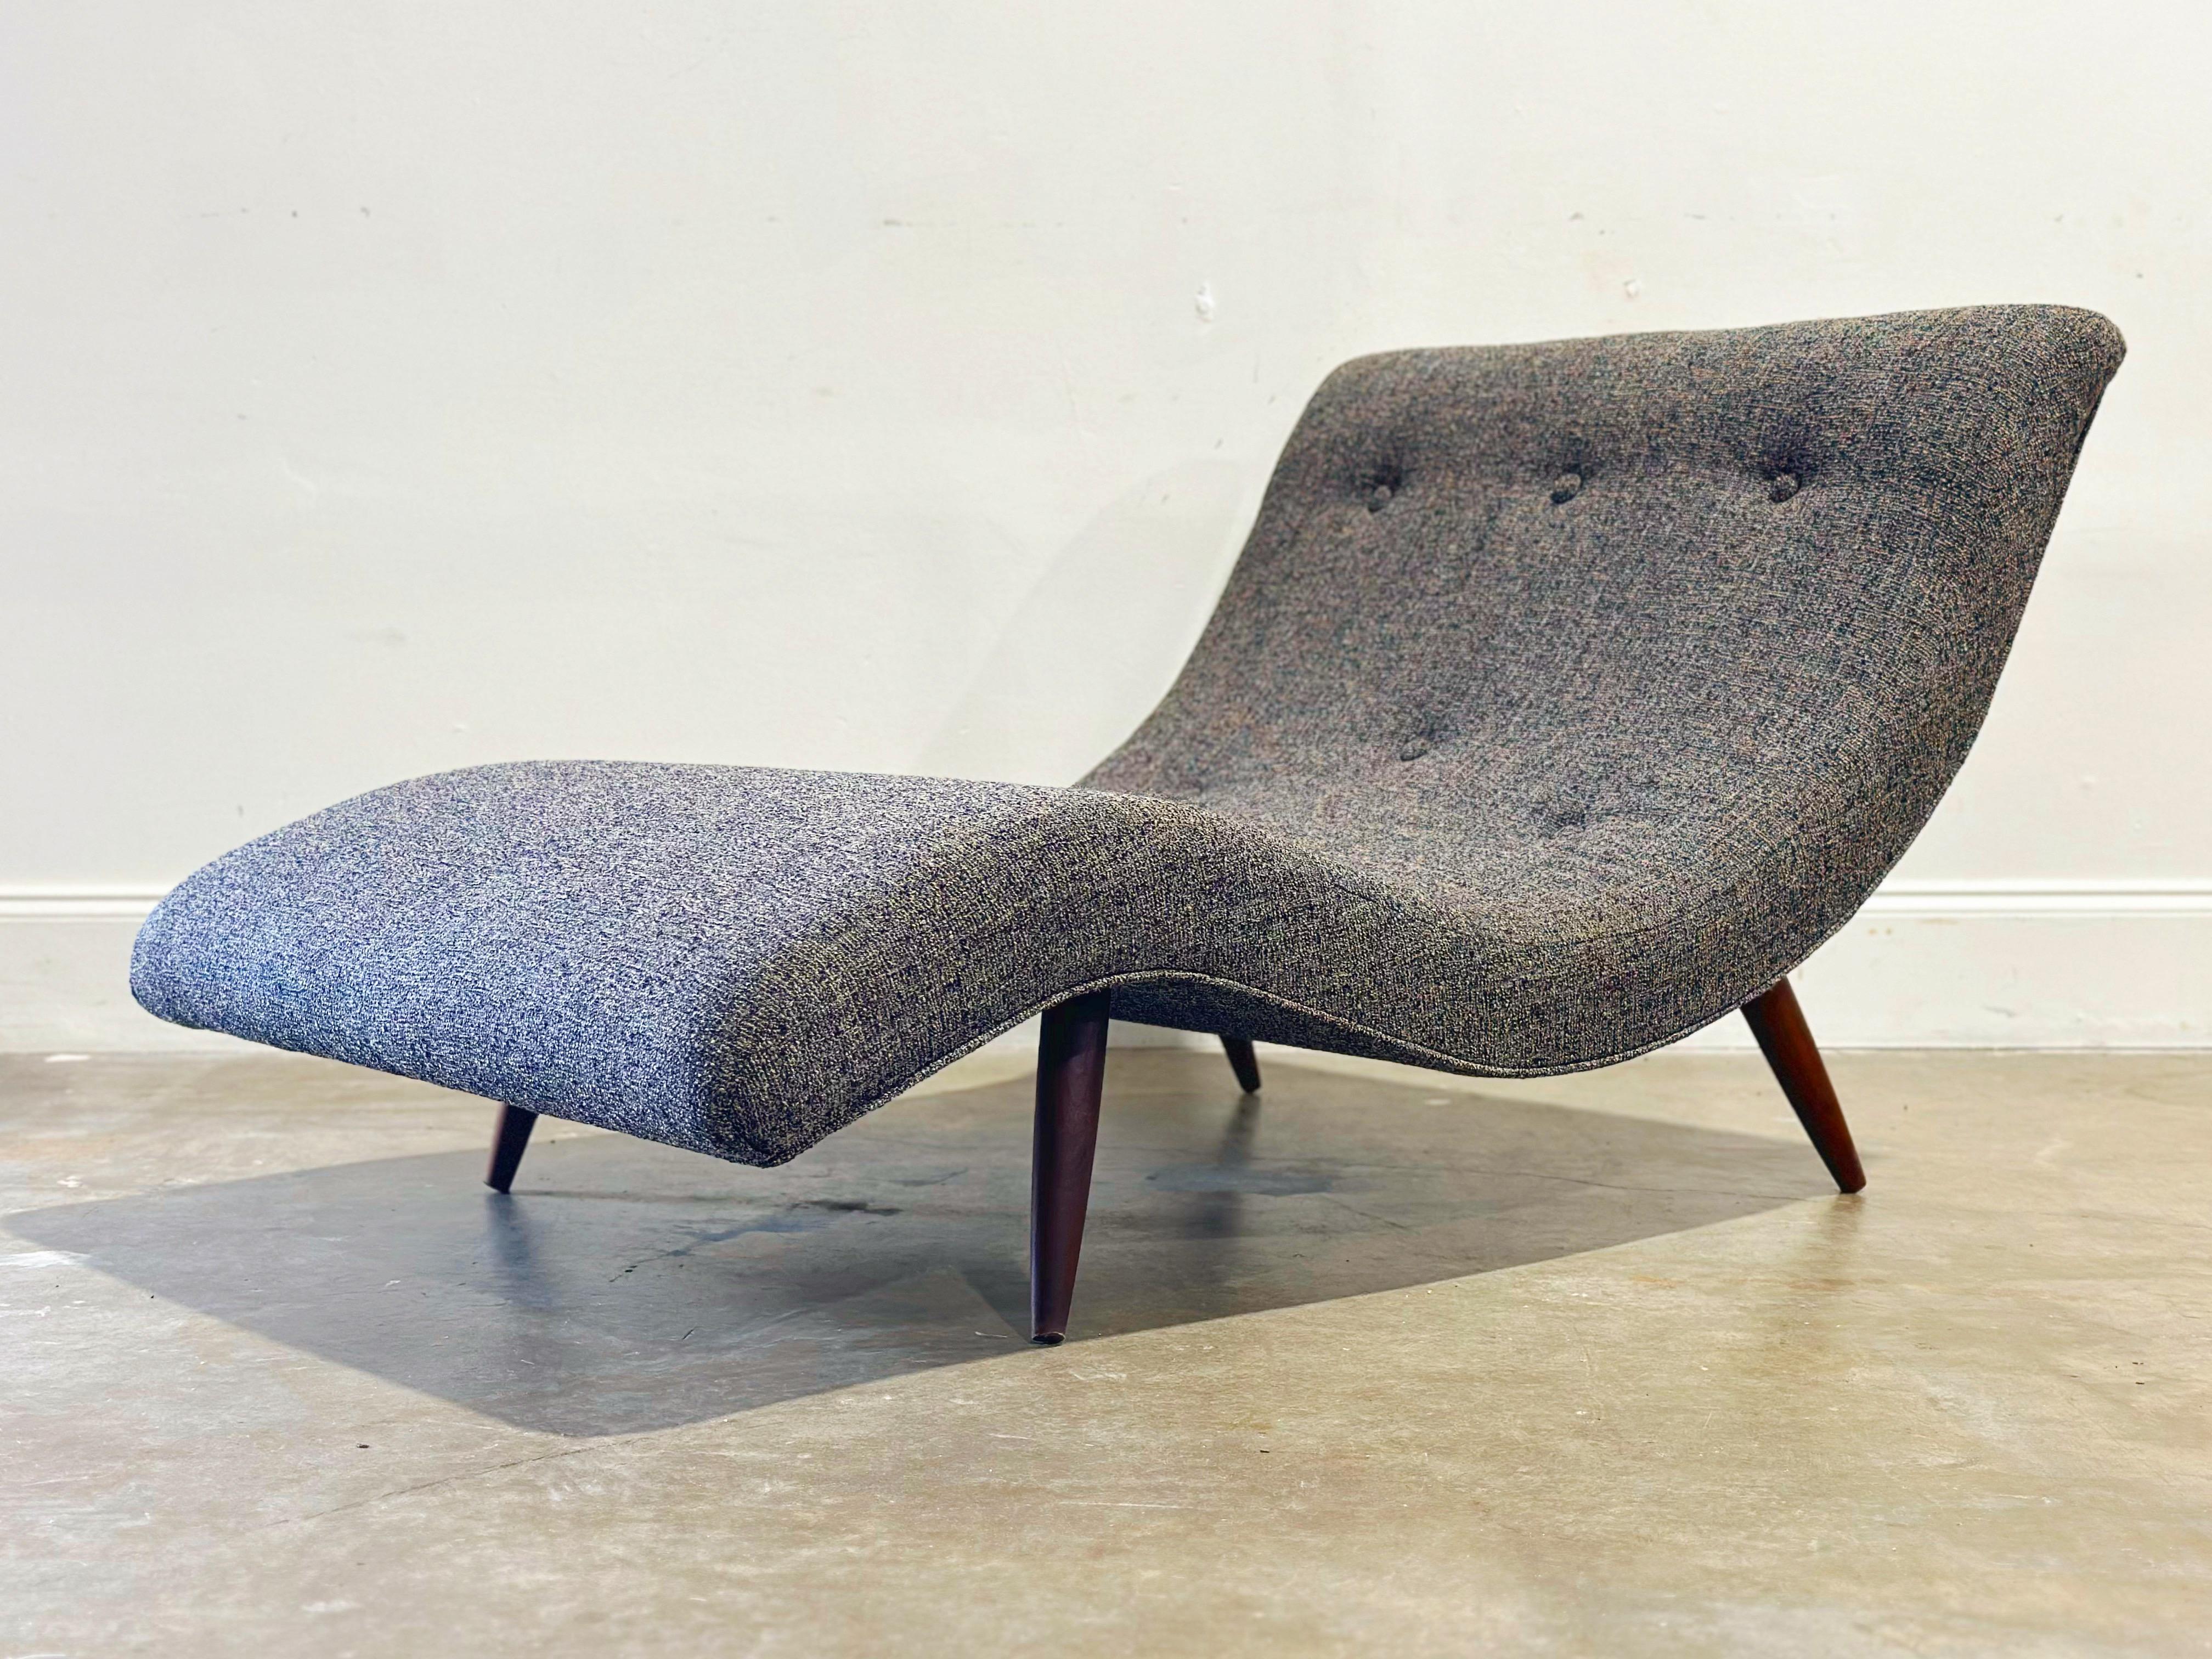 Midcentury Modern Adrian Pearsall Wave Chaise Lounge - Modernist Lounge Chair 3